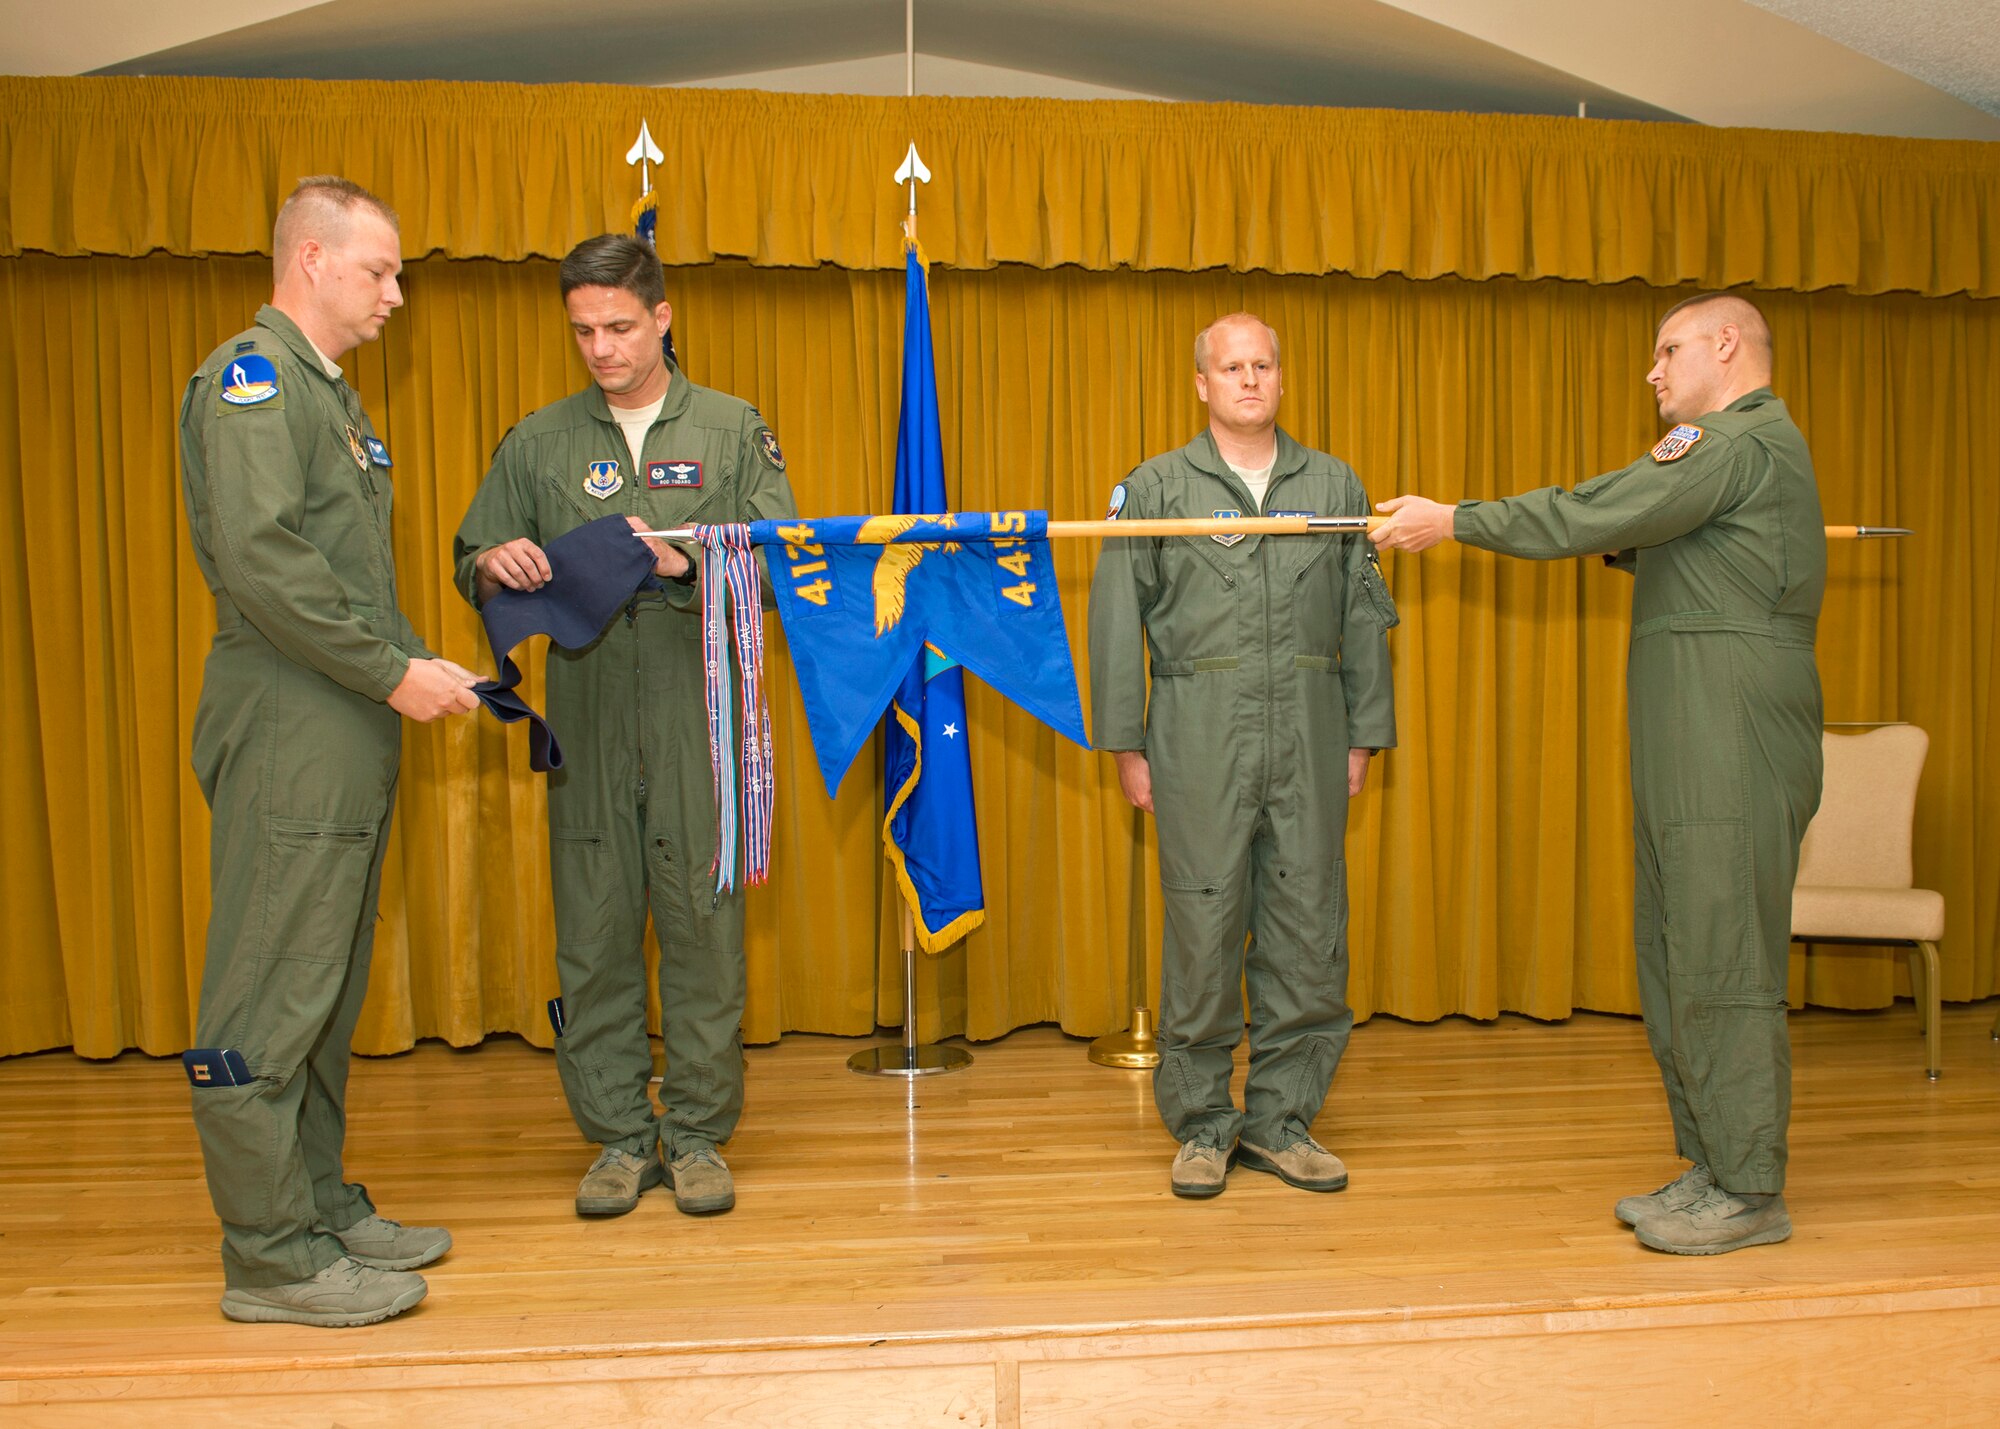 Col. Rodney Todaro (second from left), 412th Operations Group commander, cases the 445th Flight Test Squadron flag as a final symbol of closure to the squadron's history during the 445th FLTS inactivation ceremony held May 1 at Club Muroc. The 445th Flight Test Squadron was consolidated into three other Combined Test Forces. (U.S. Air Force photo by Edward Cannon)